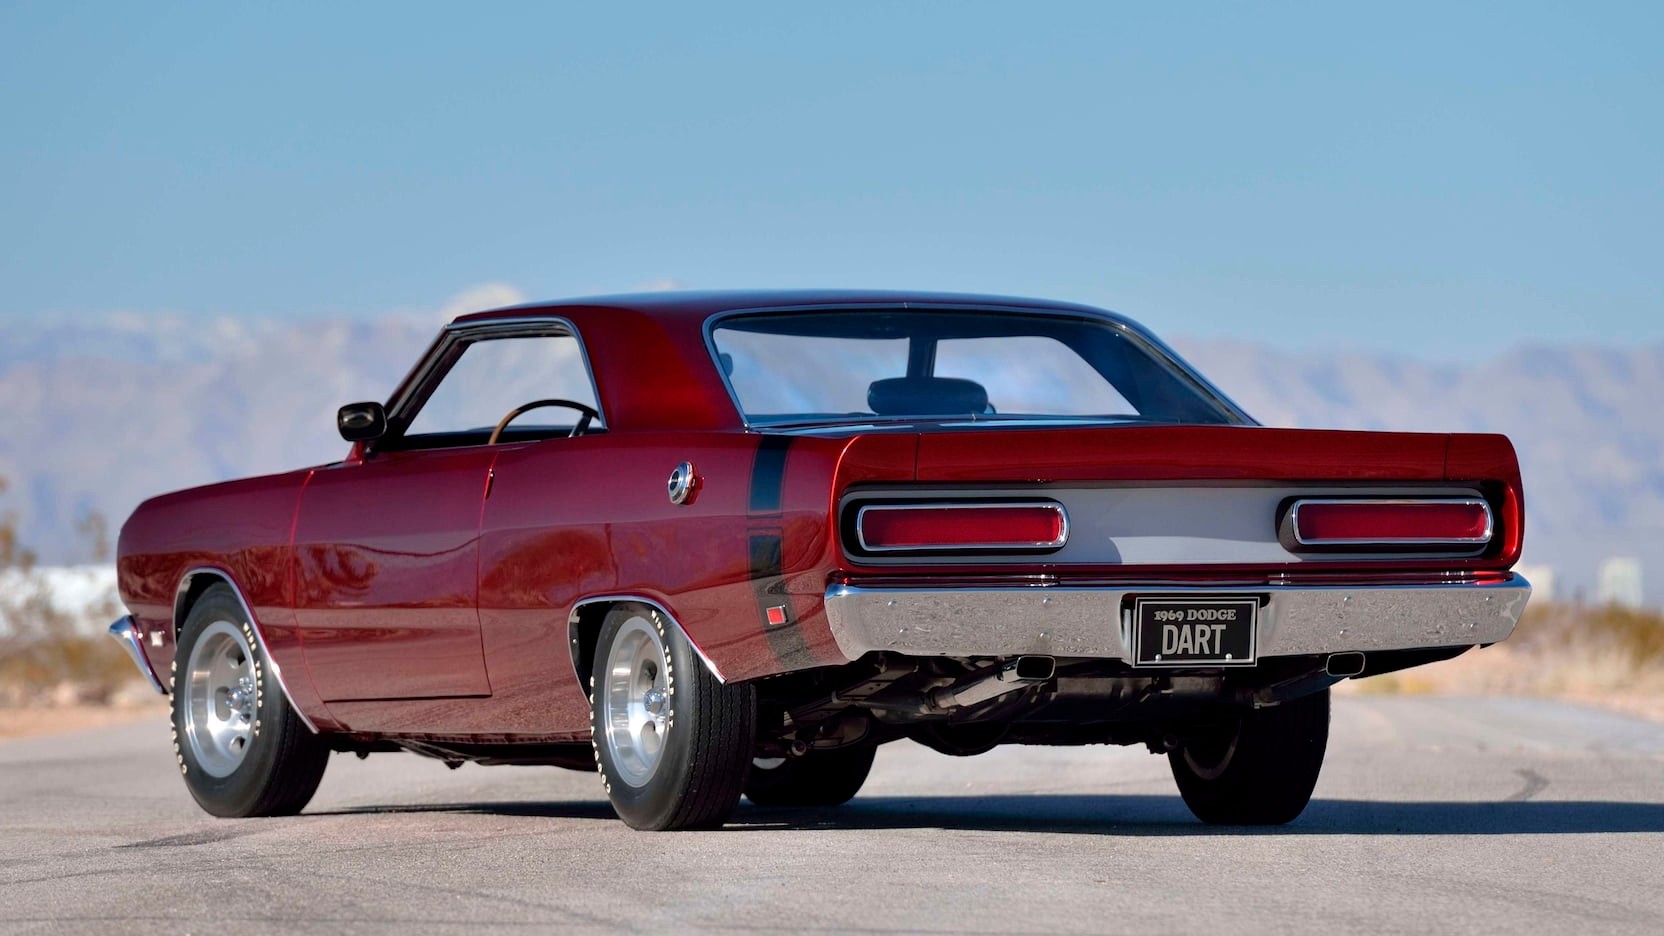 Dodge Dart Swinger 340 Concept Going Up For Auction, Originally Debuted In 1969 Carscoops photo